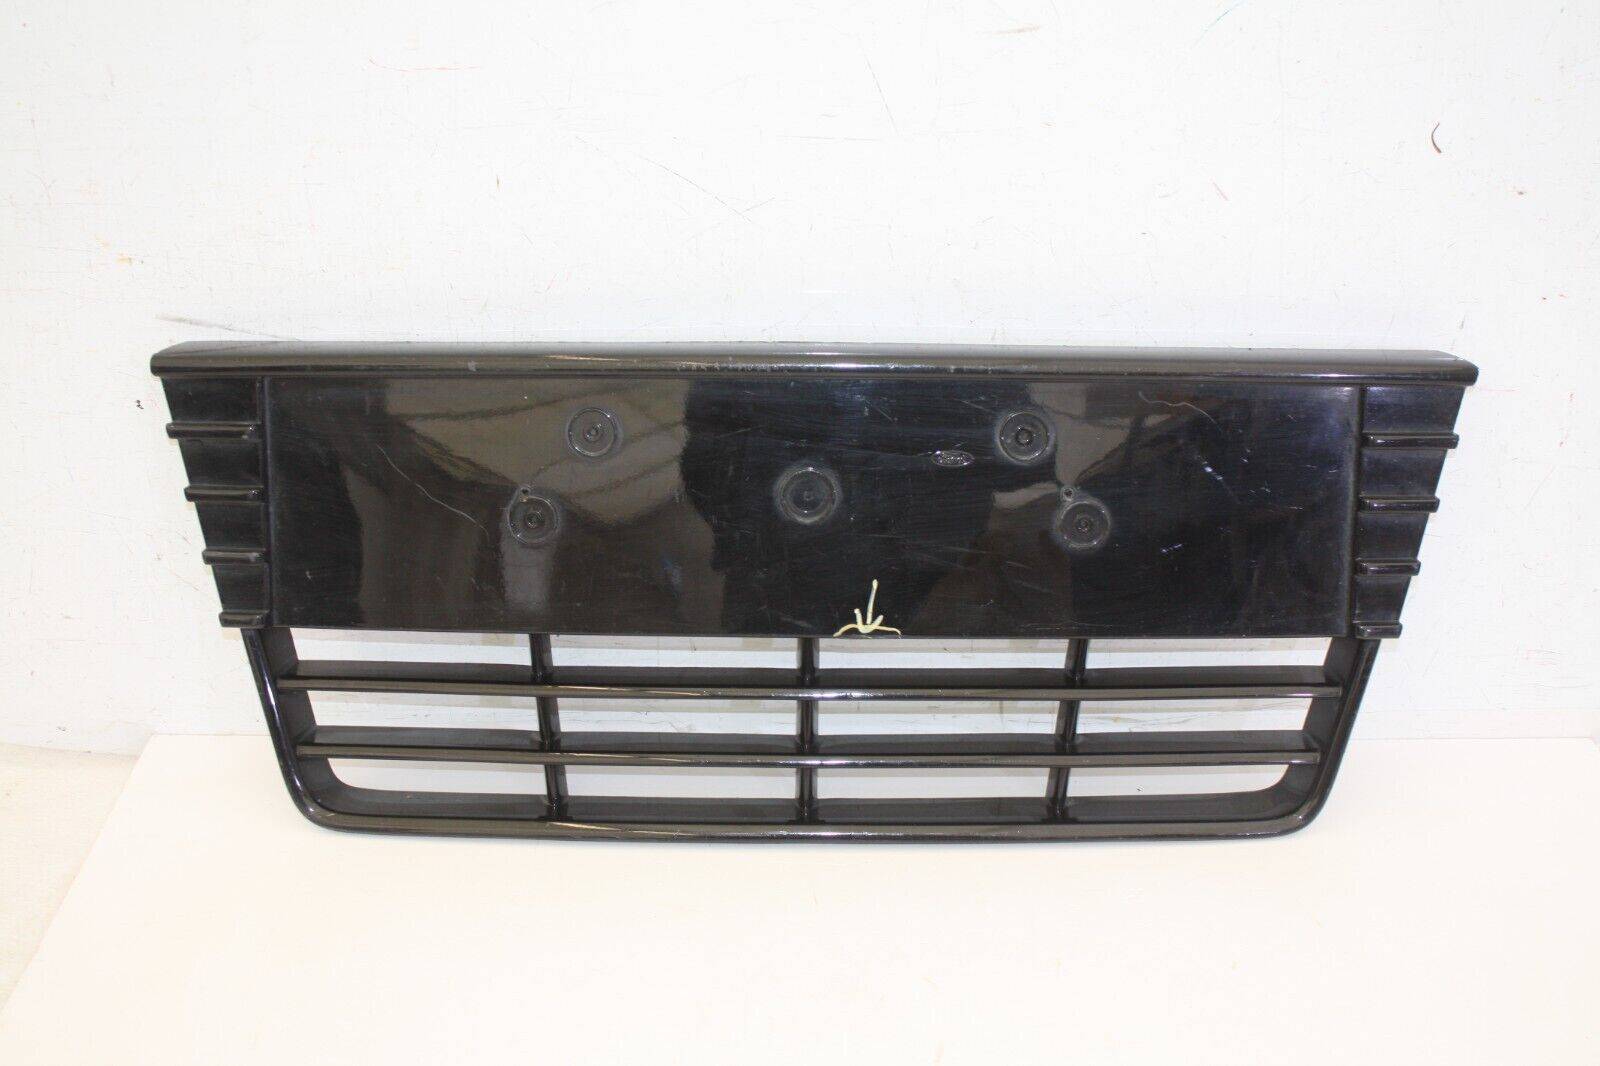 Ford-Focus-Front-Bumper-Grill-2011-TO-2014-BM51-17K945-E-Genuine-SEE-PICS-176238481574